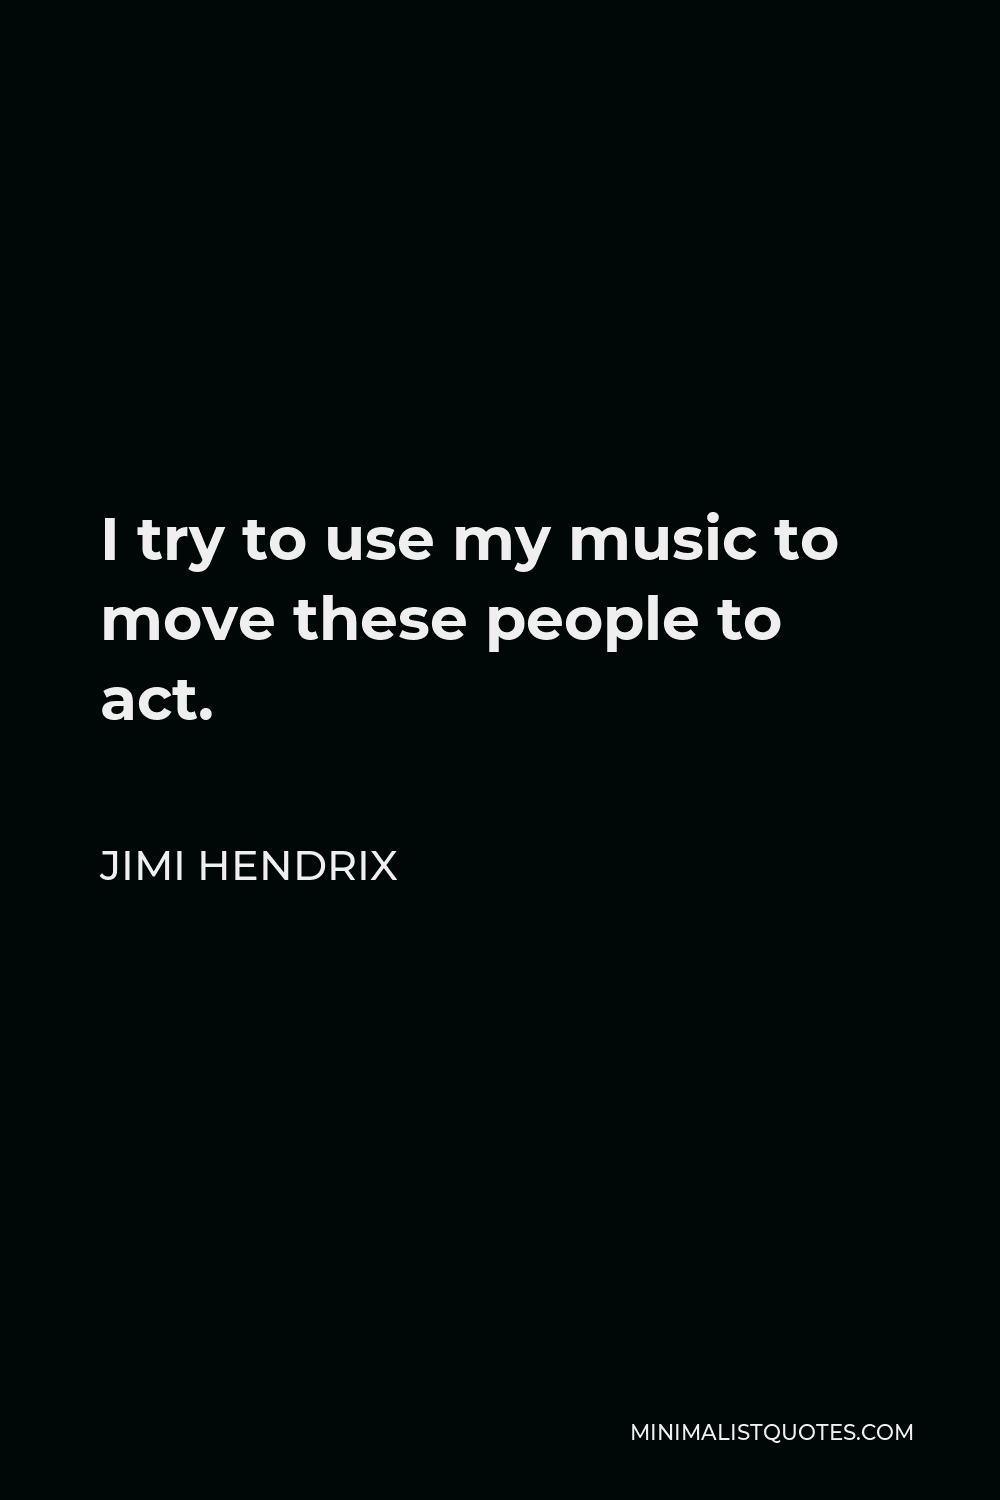 Jimi Hendrix Quote - I try to use my music to move these people to act.